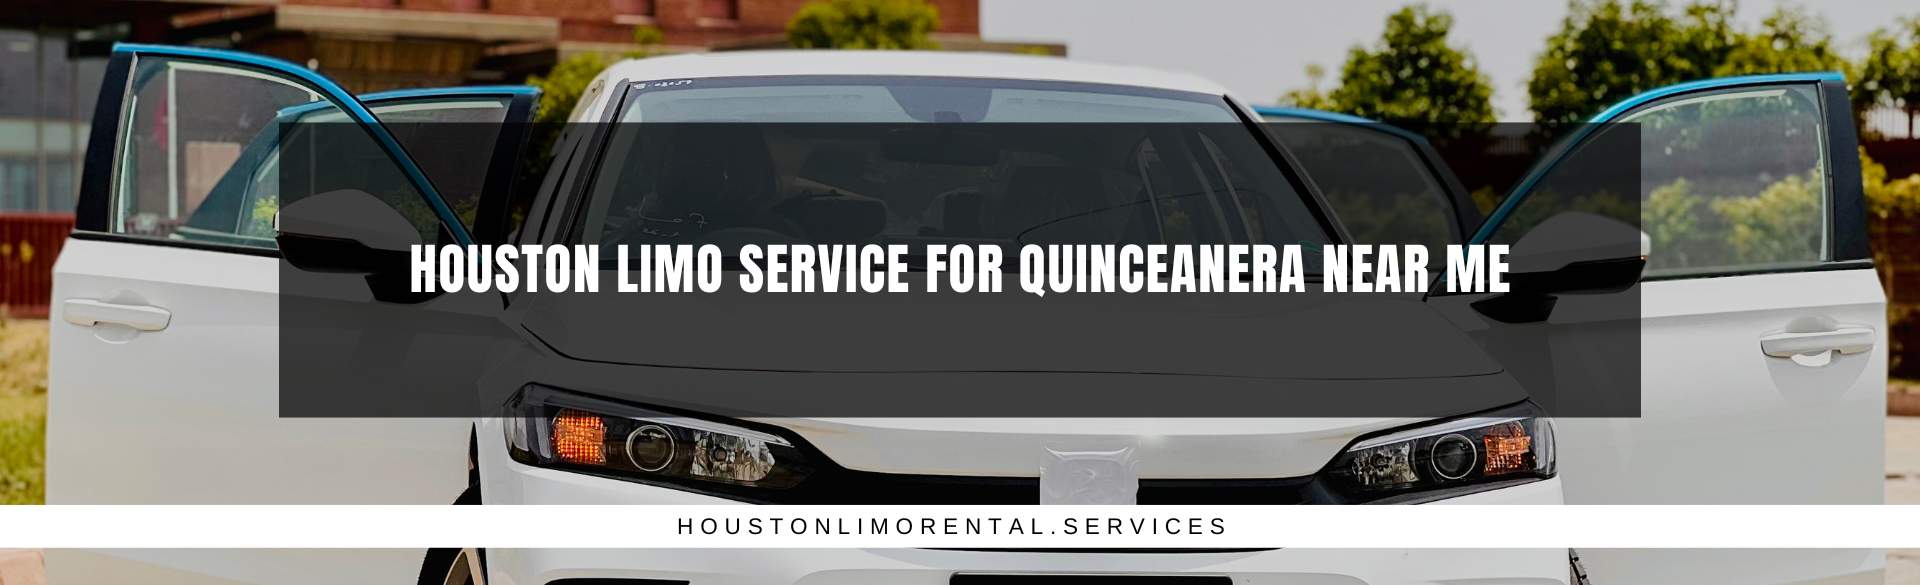 Houston Limo Service for Quinceanera Near Me